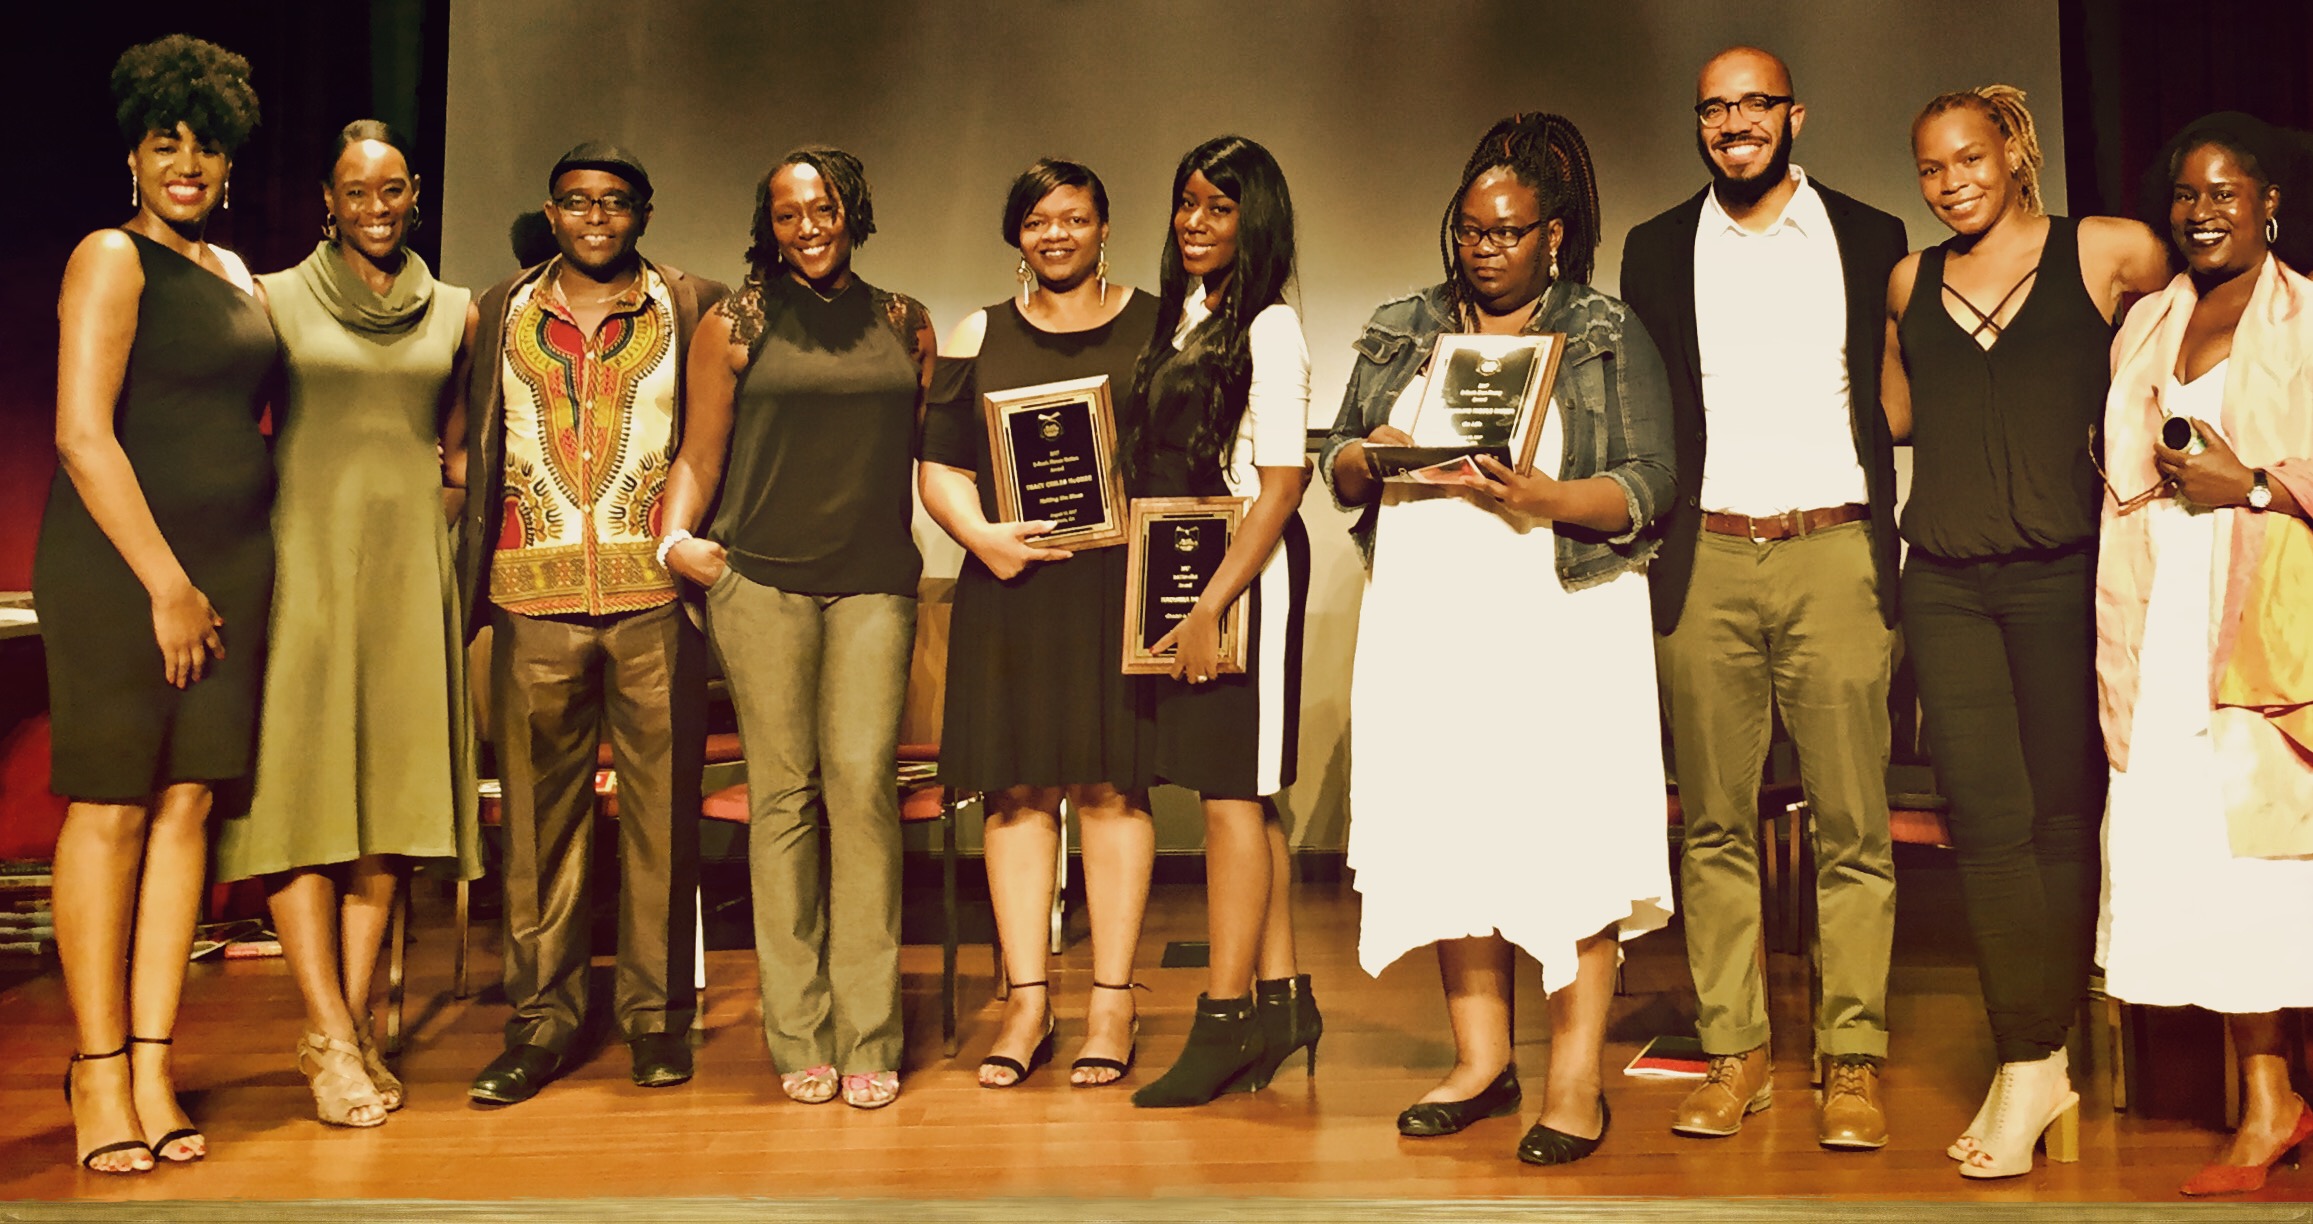  BCALA awardees for poetry, fiction, and non-fiction.  2017 BCALA Awardees: Natashia Deon ( Grace ), Jaqueline Woodson ( Another Brooklyn ), Colson Whitehead ( Underground Railroad ), Margot Shetterly ( Hidden Figures ), Monique Morris ( Pushout: The